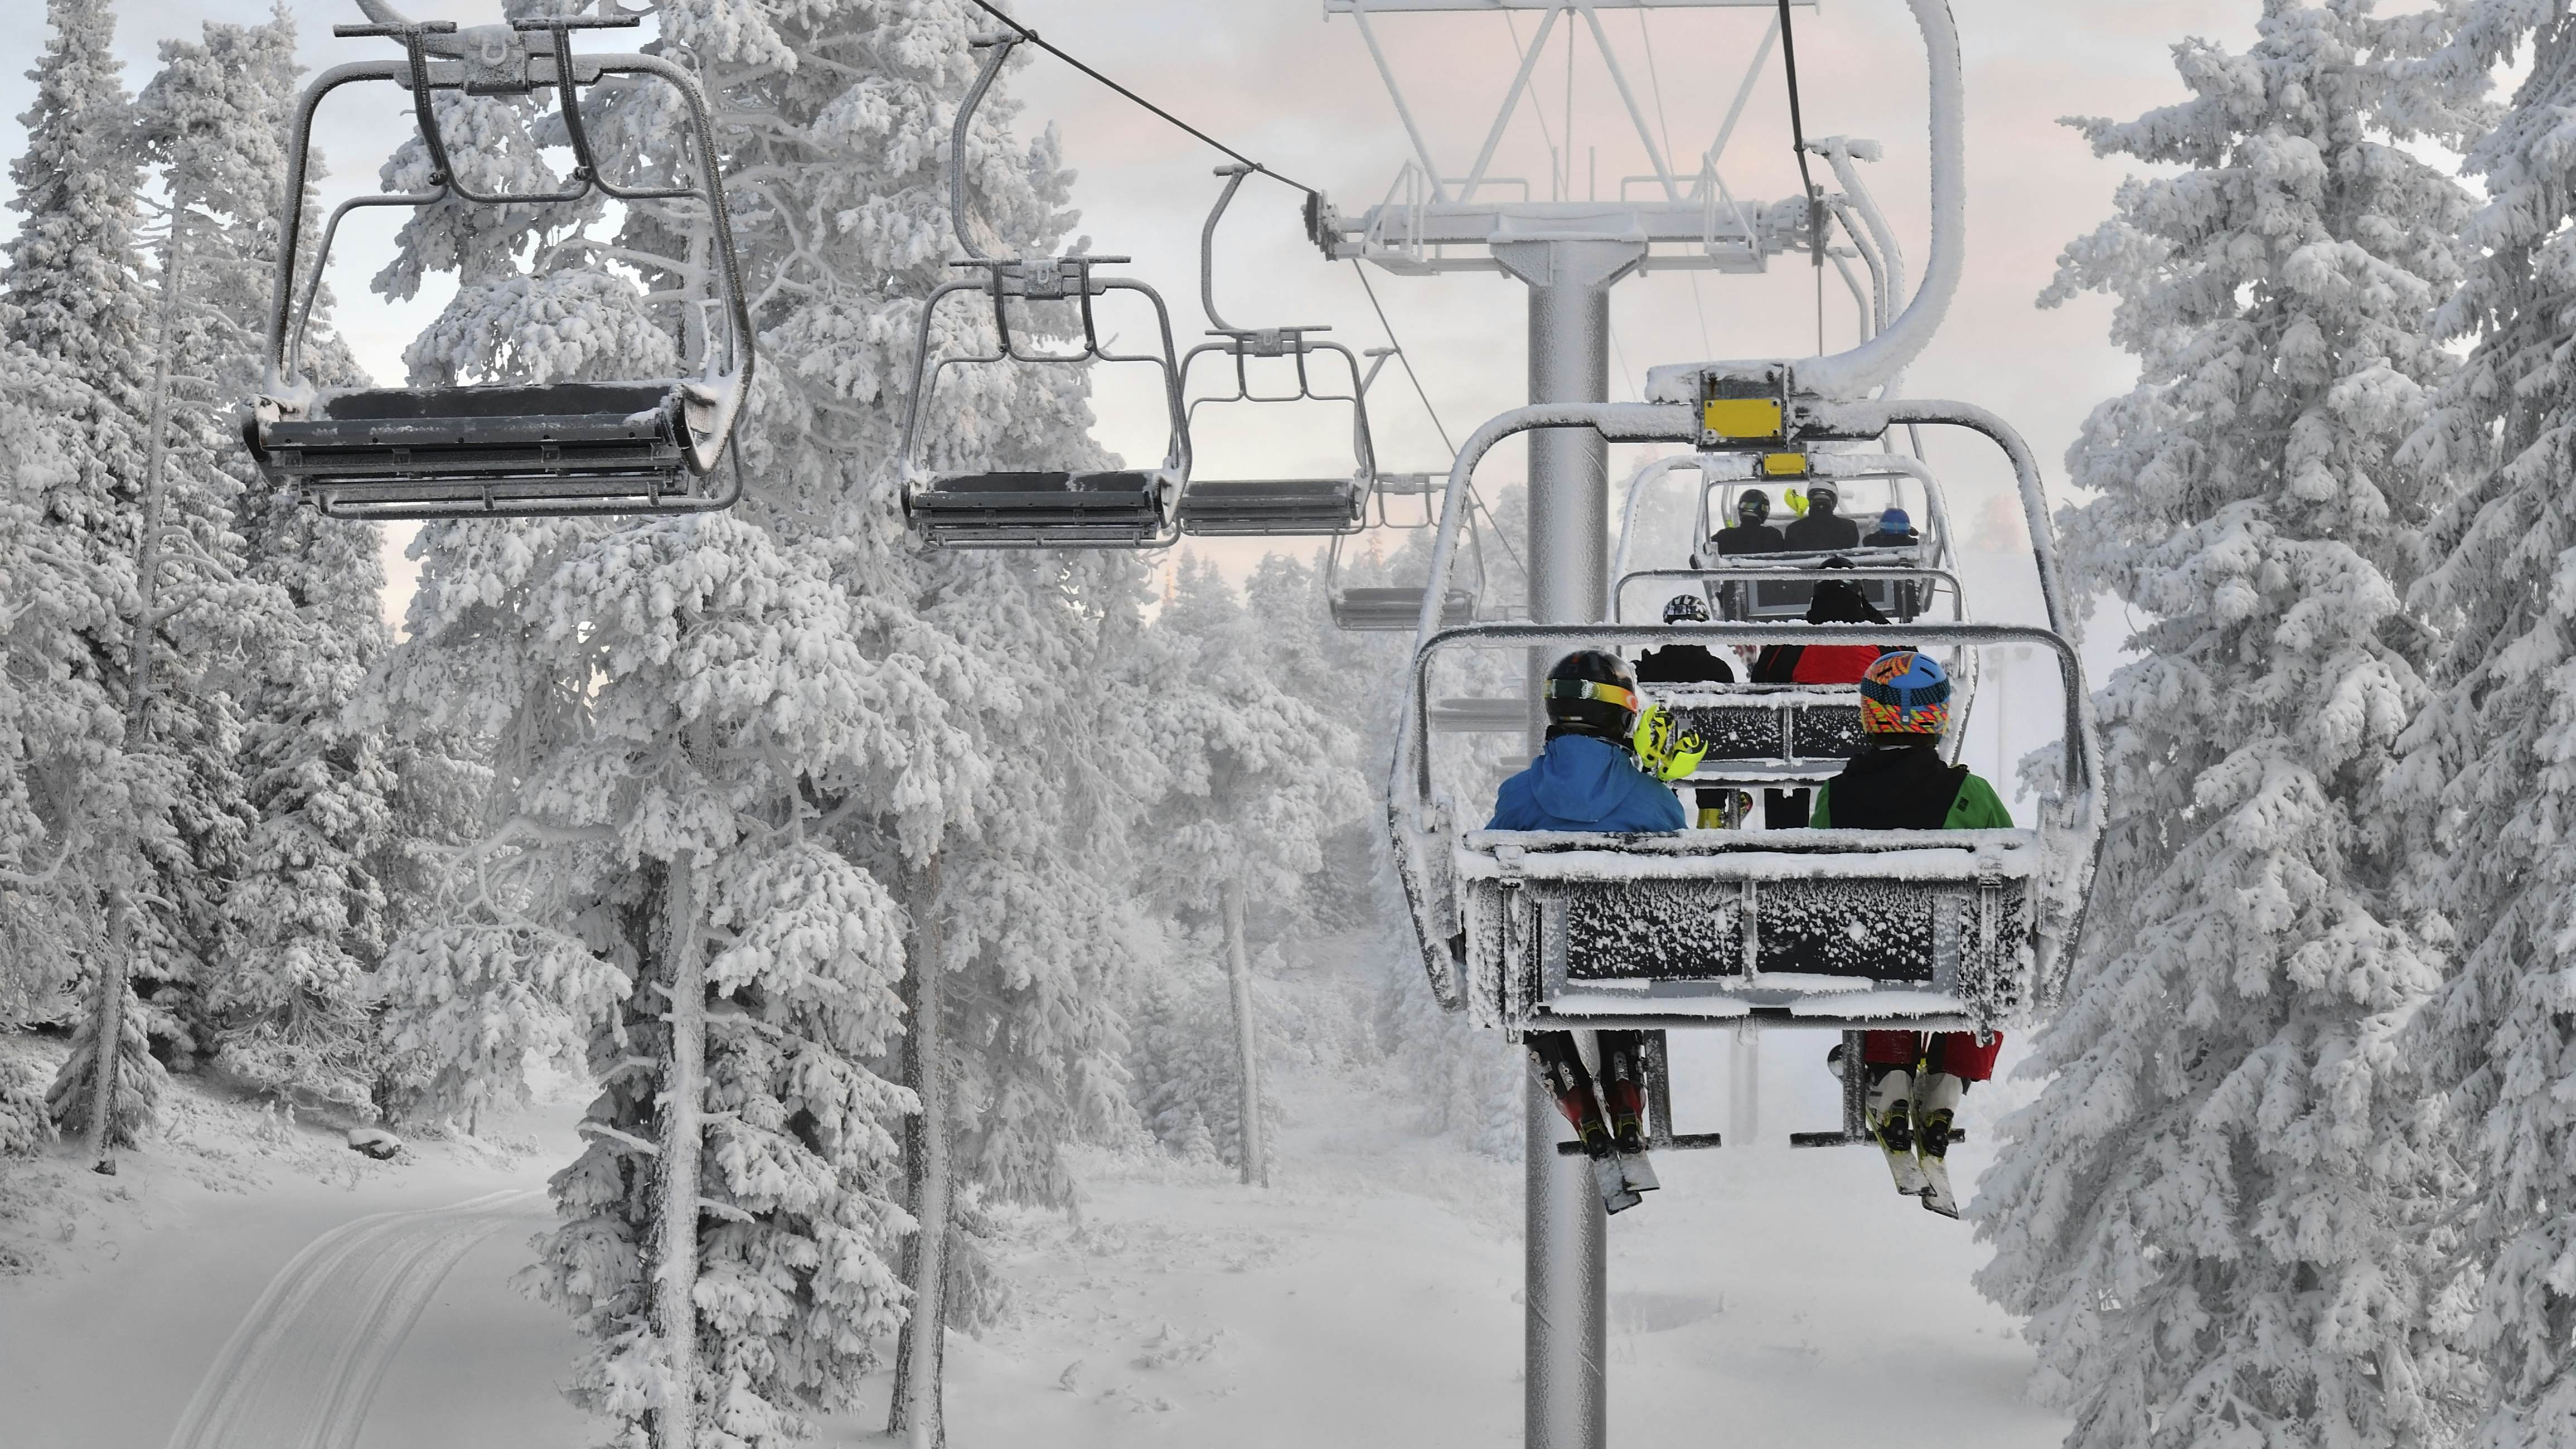 Ski chair lift with skiers